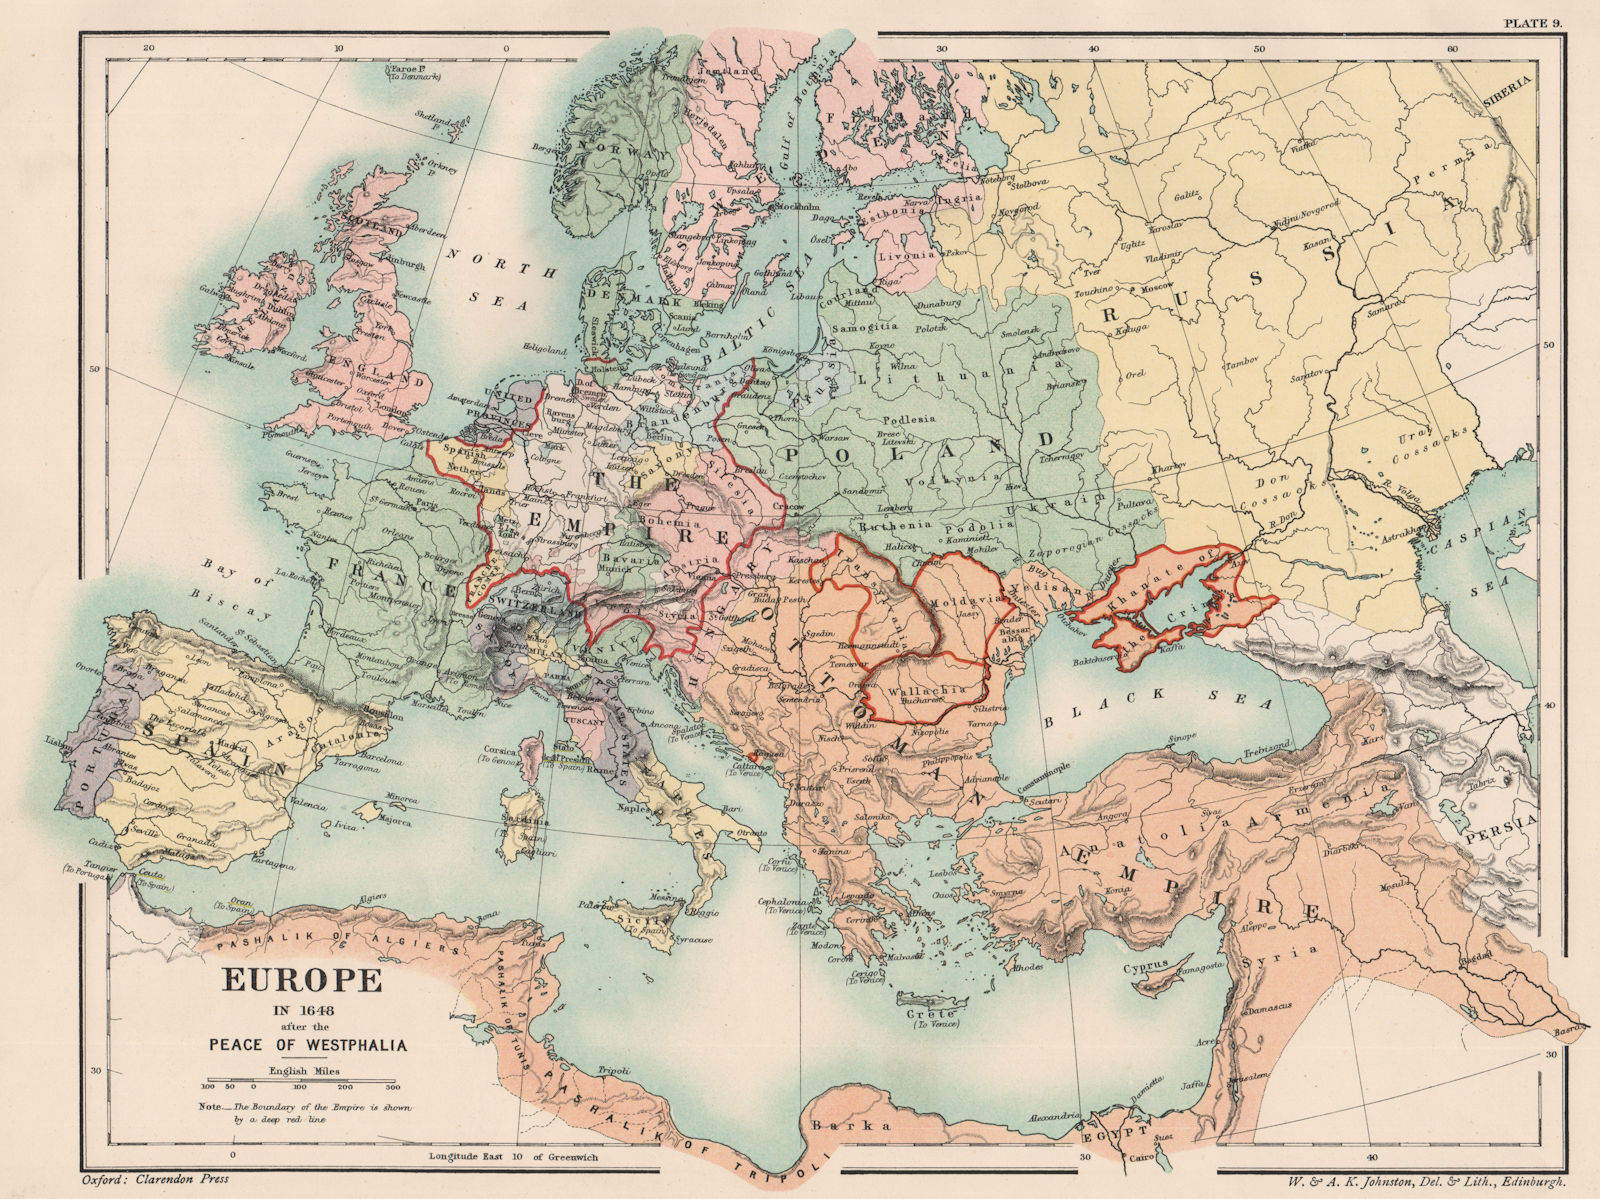 EUROPE IN 1648. After the Peace of Westphalia. Holy Roman Empire 1902 old map